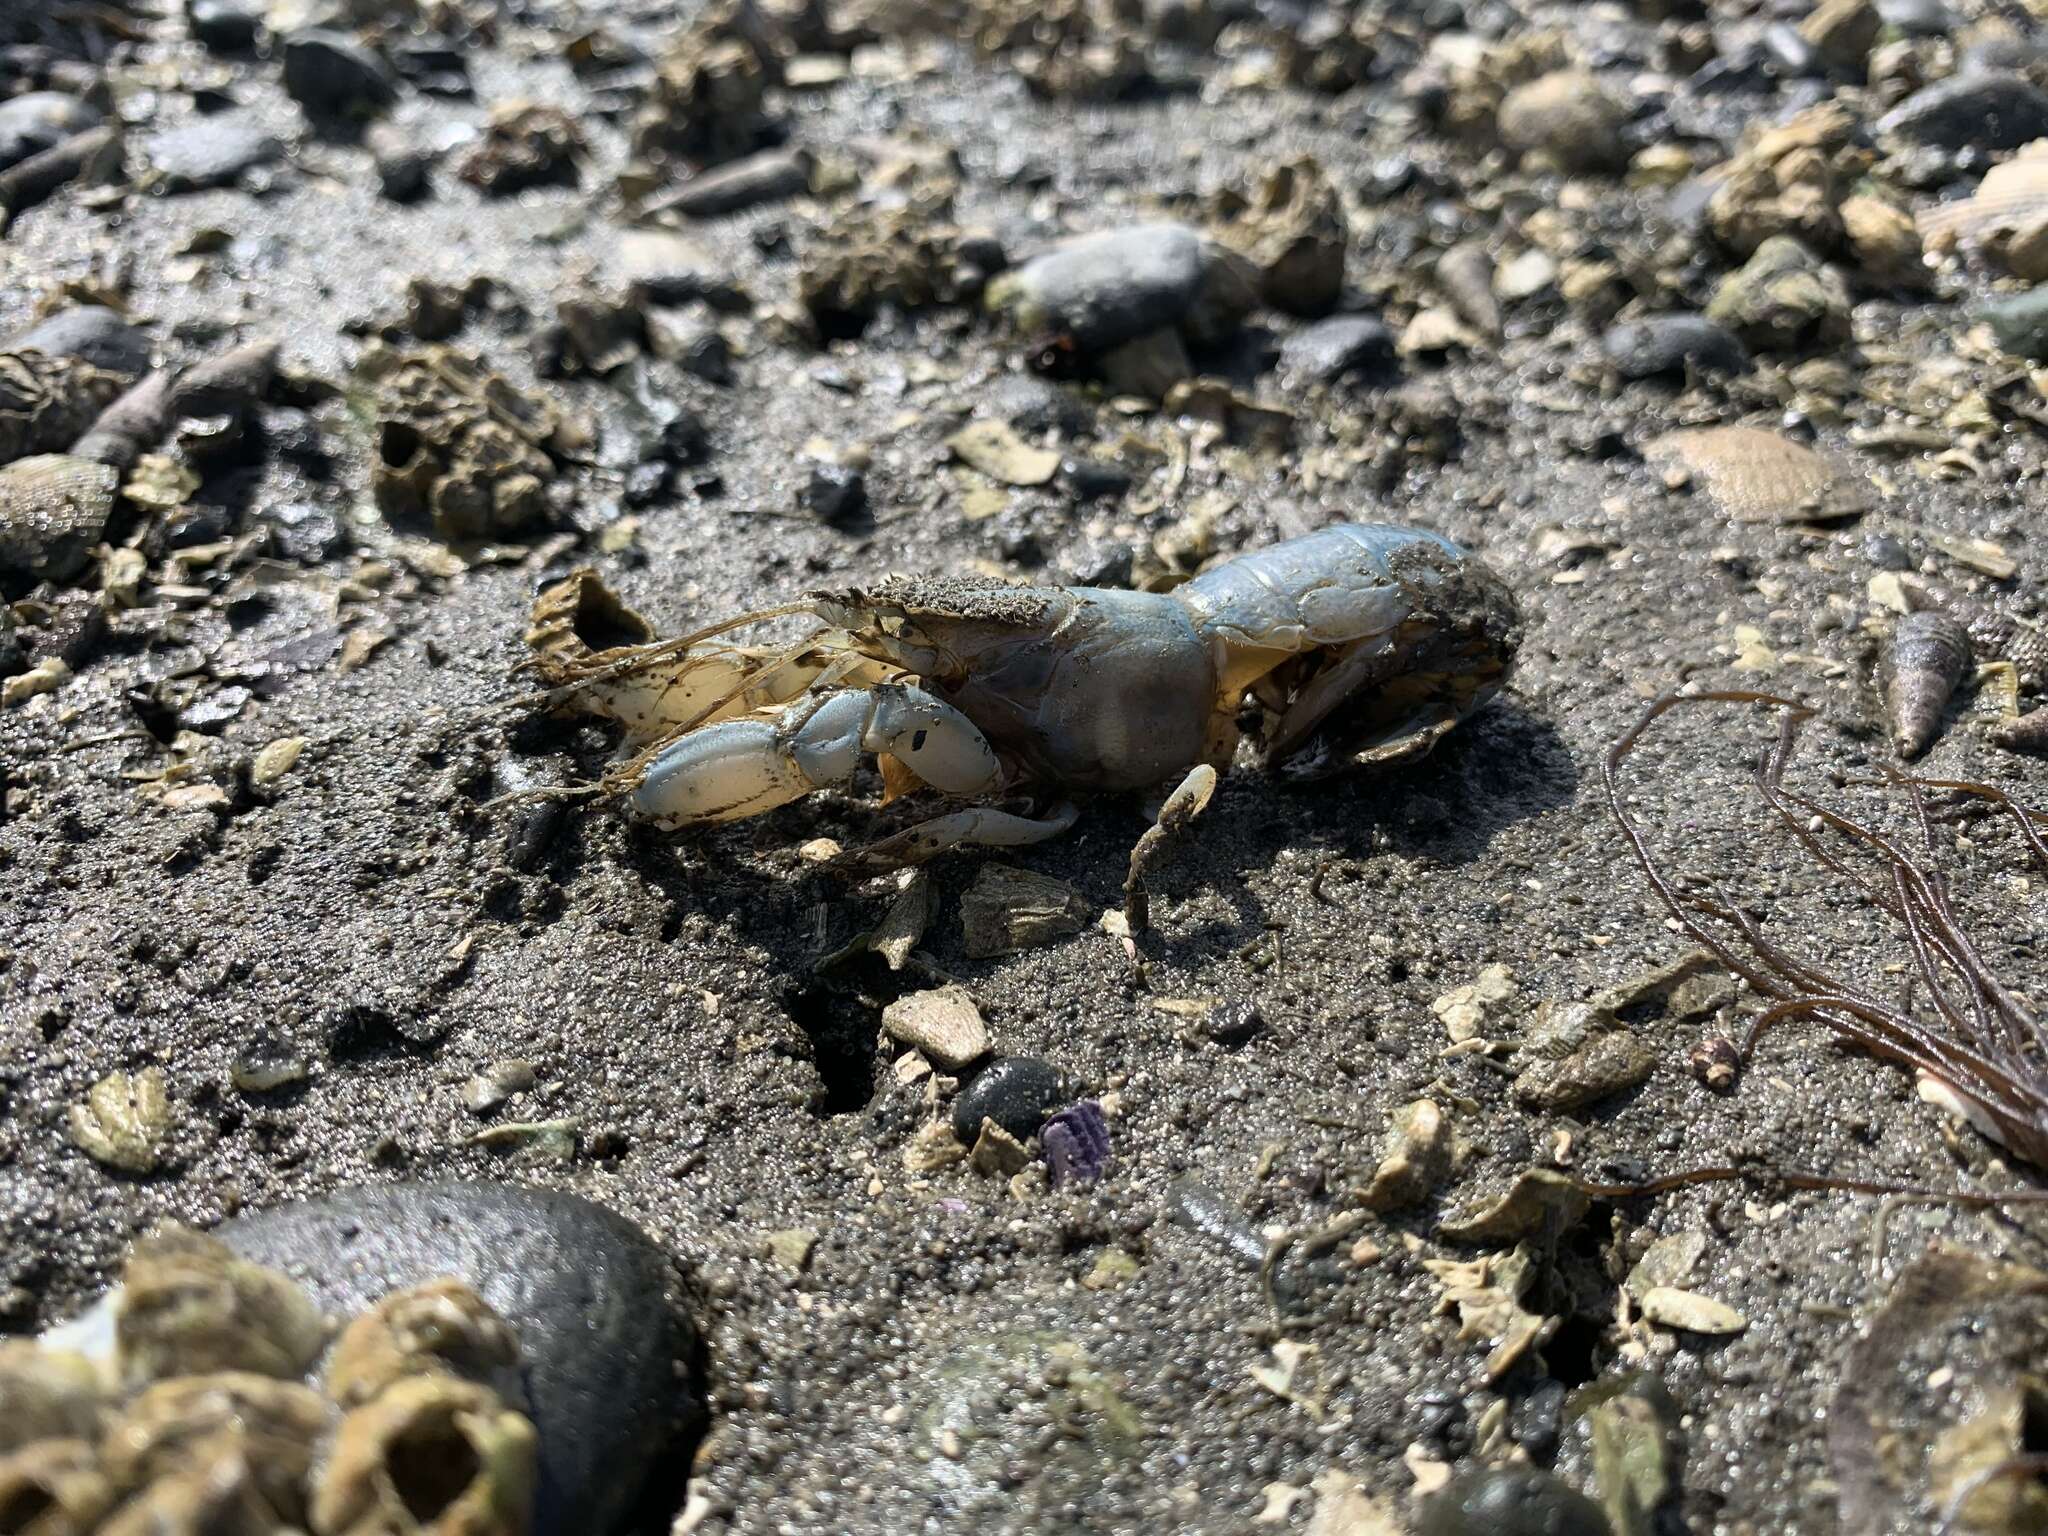 Image of Puget Sound ghost crab